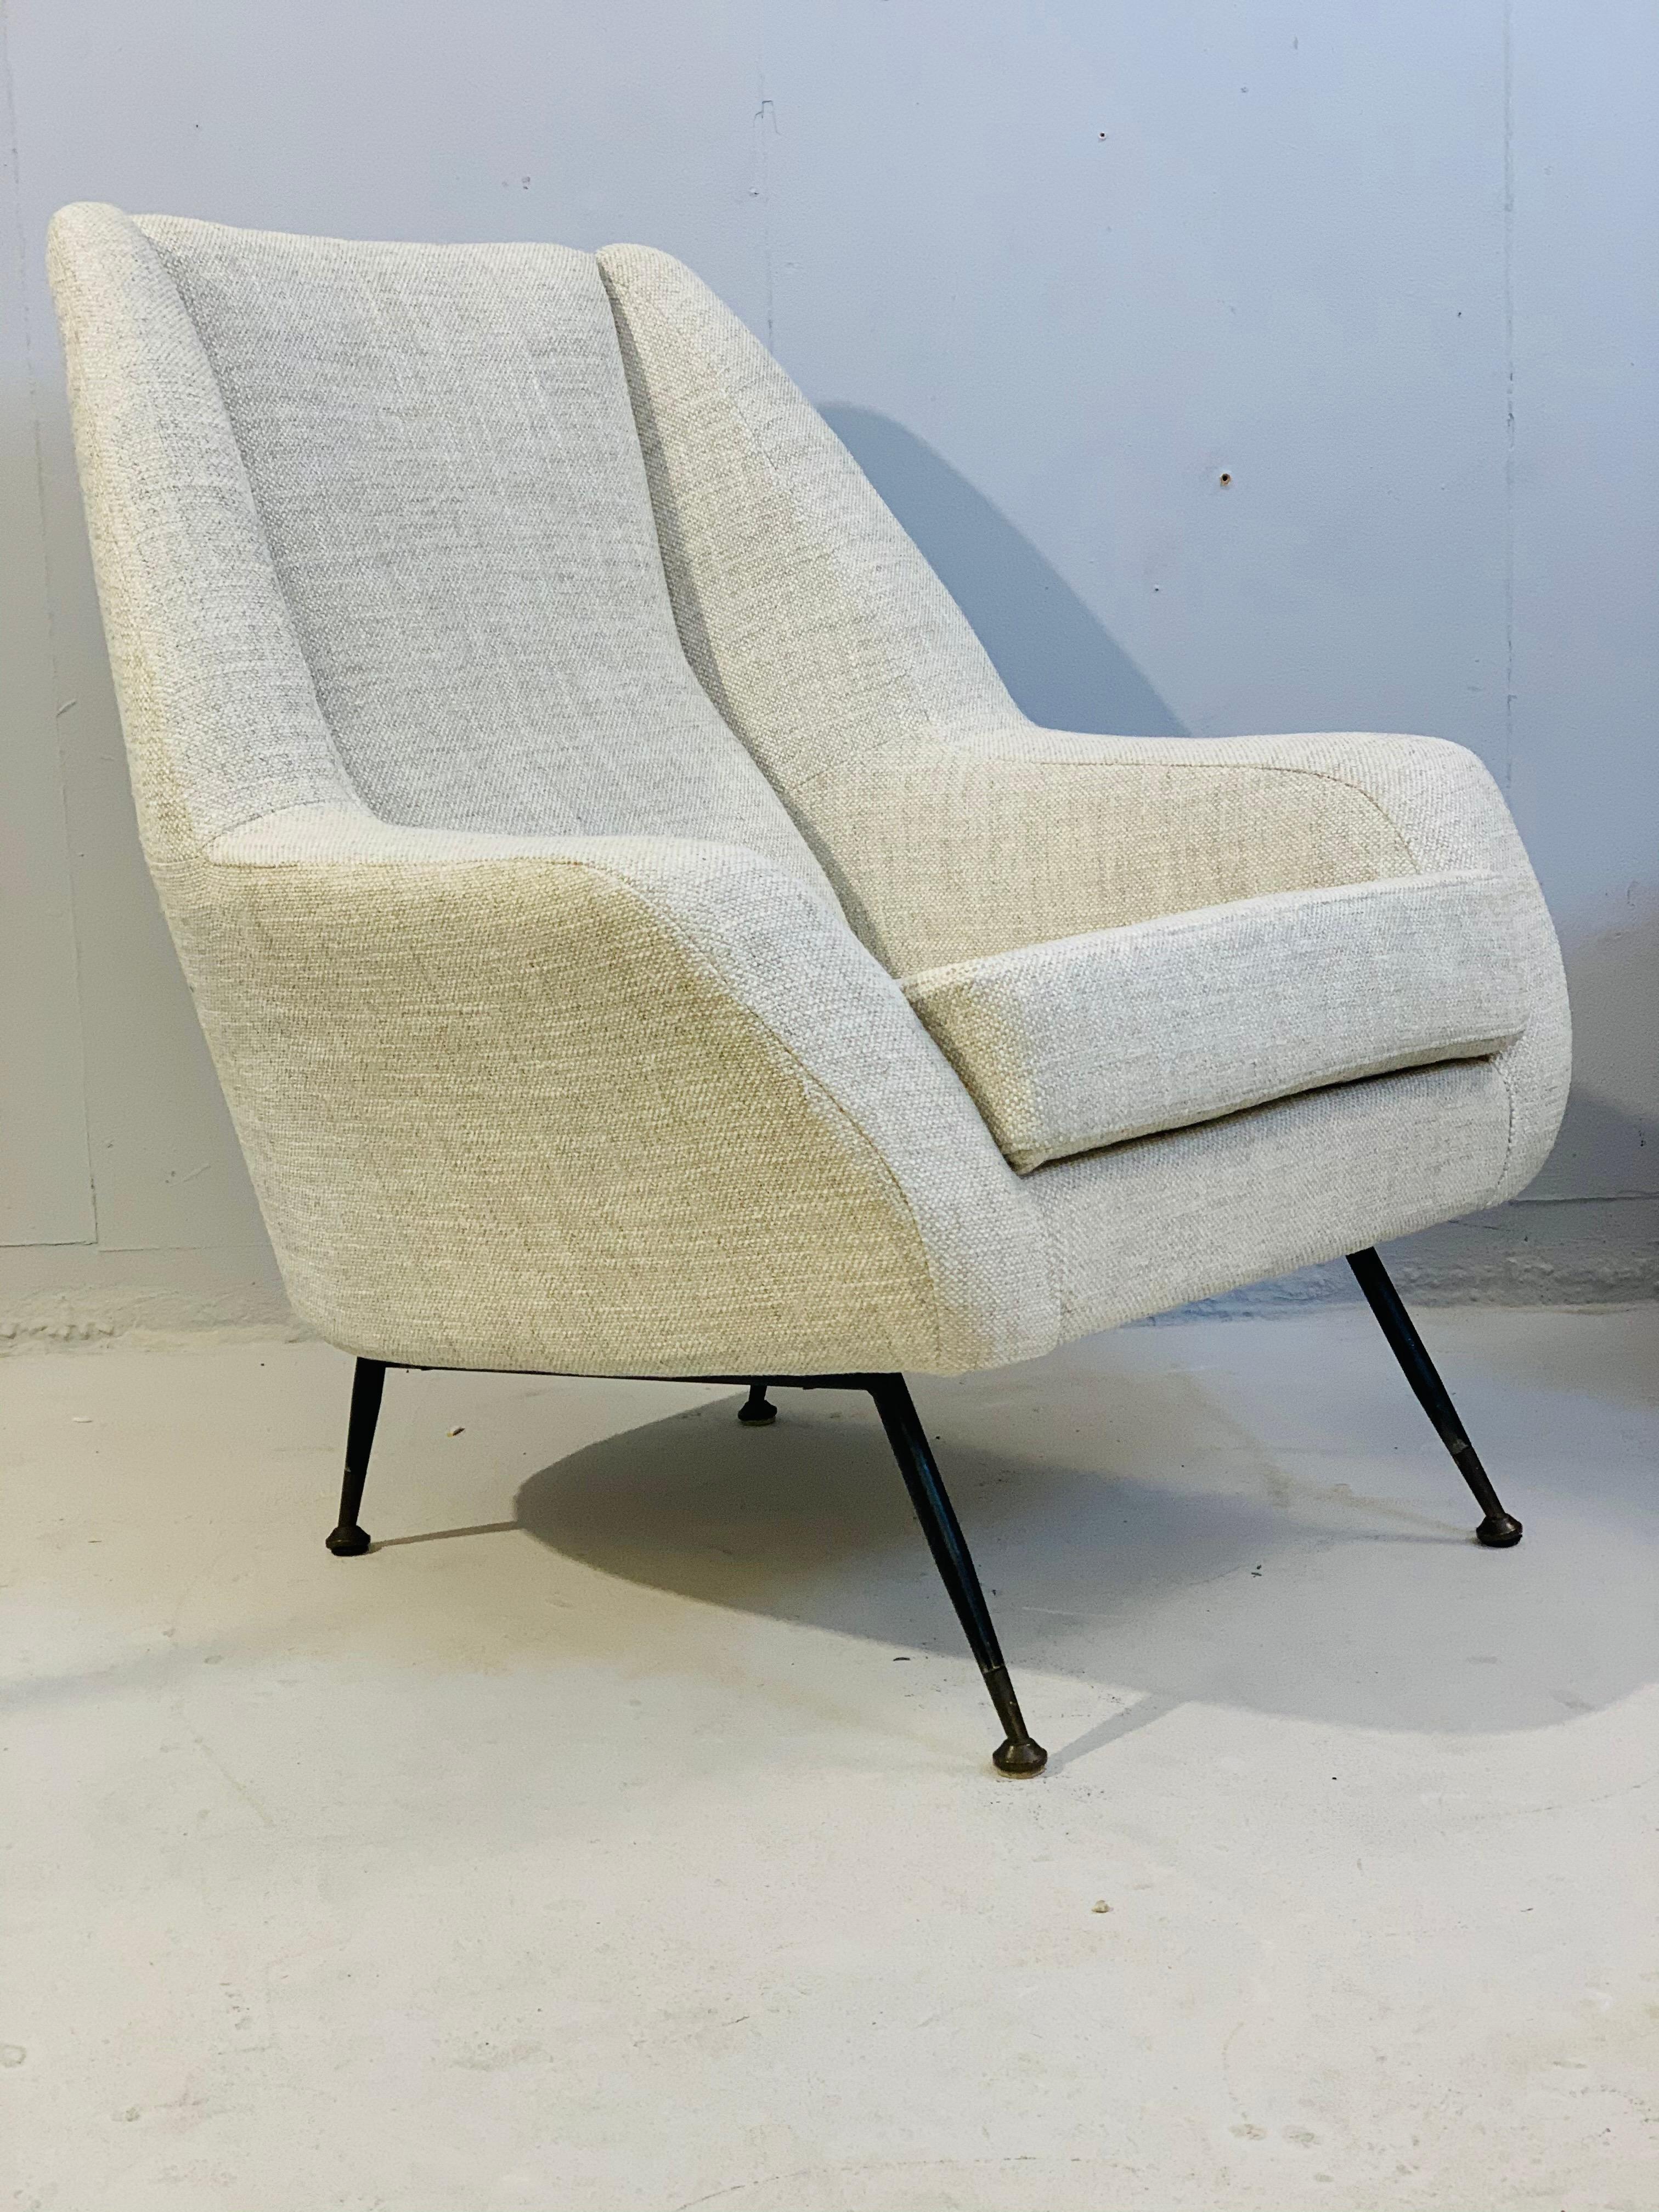 Pair of Mid-Century Modern Italian Armchairs in White Fabric, circa 1950 In Good Condition For Sale In Brussels, BE